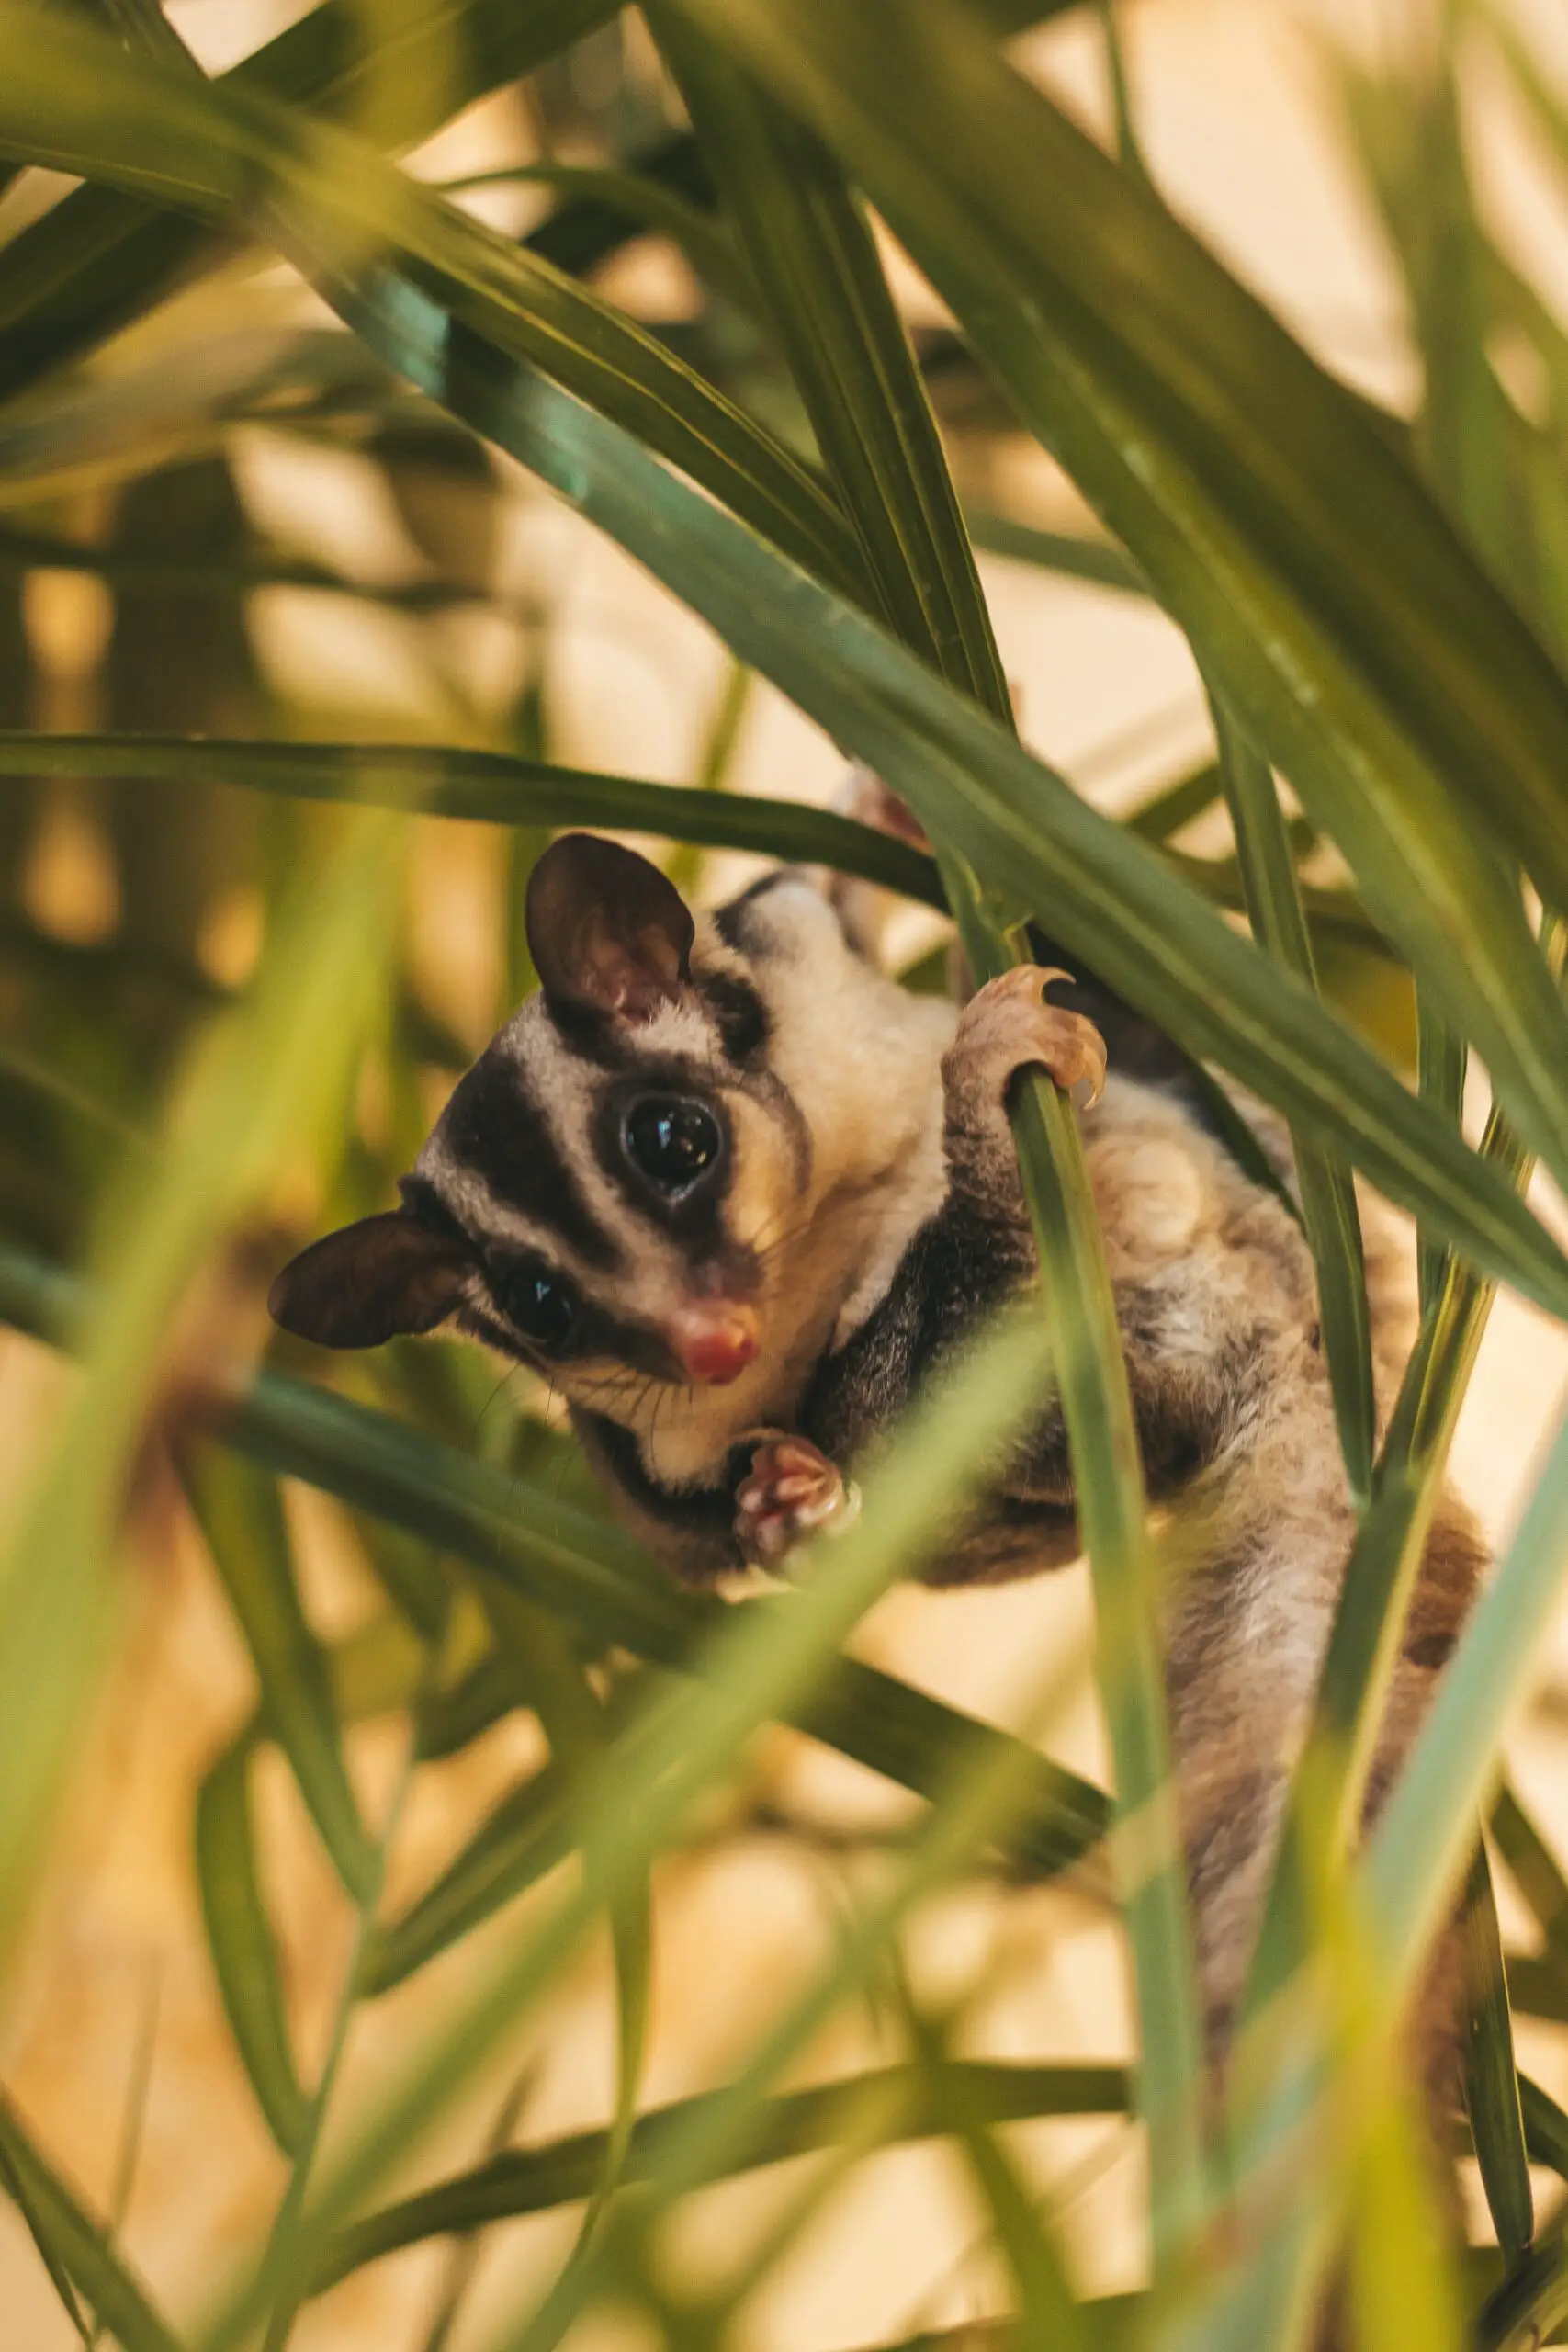 Why Are My Sugar Gliders Fighting? A Helpful Guide